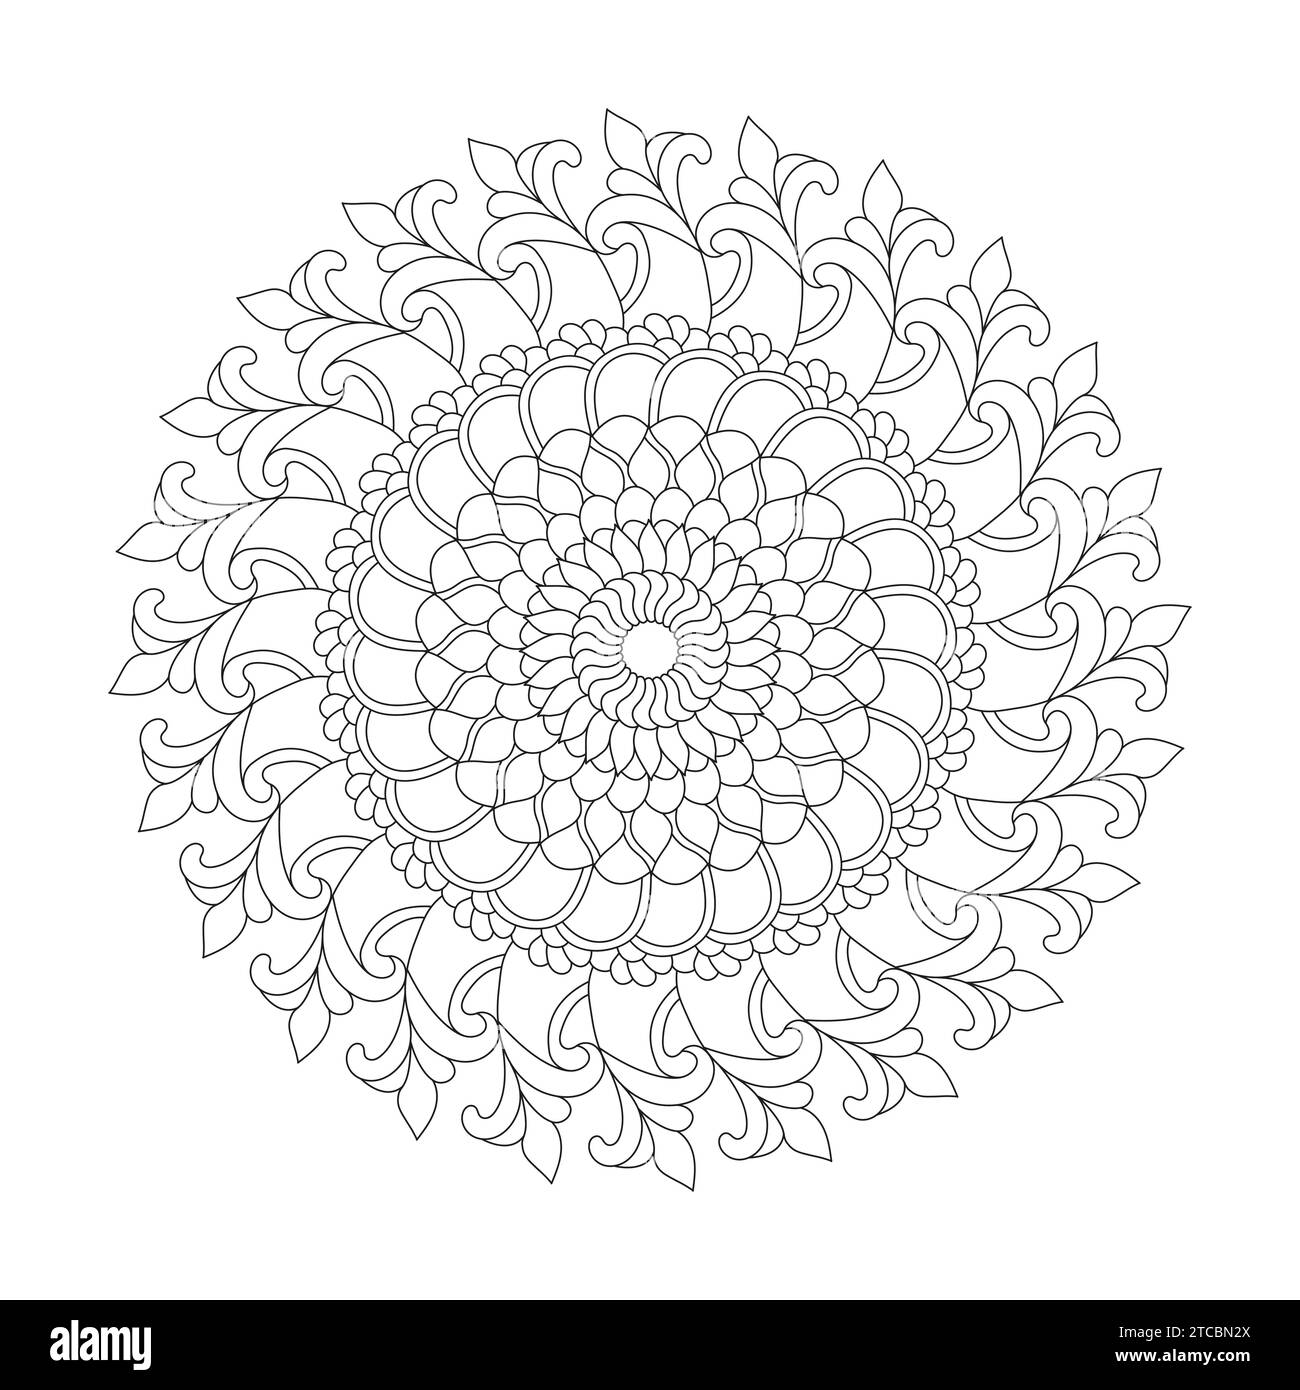 Mandala rainbow rhapsody colouring book page for KDP book interior. Peaceful Petals, Ability to Relax, Brain Experiences, Harmonious Haven, Peaceful Po Stock Vector